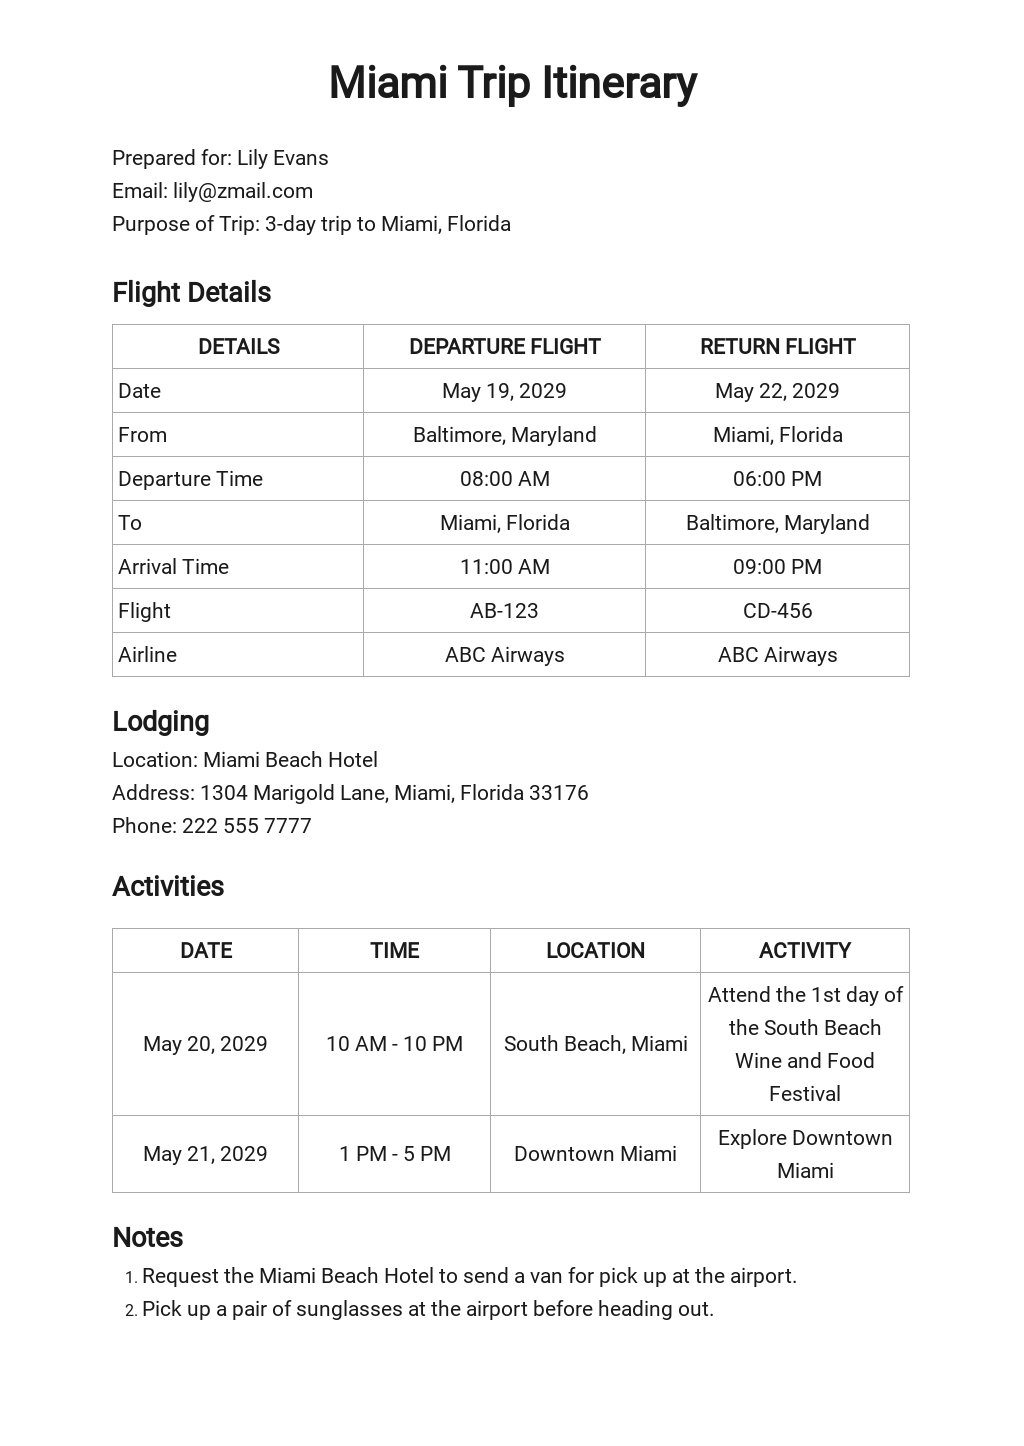 sample of travel itinerary template